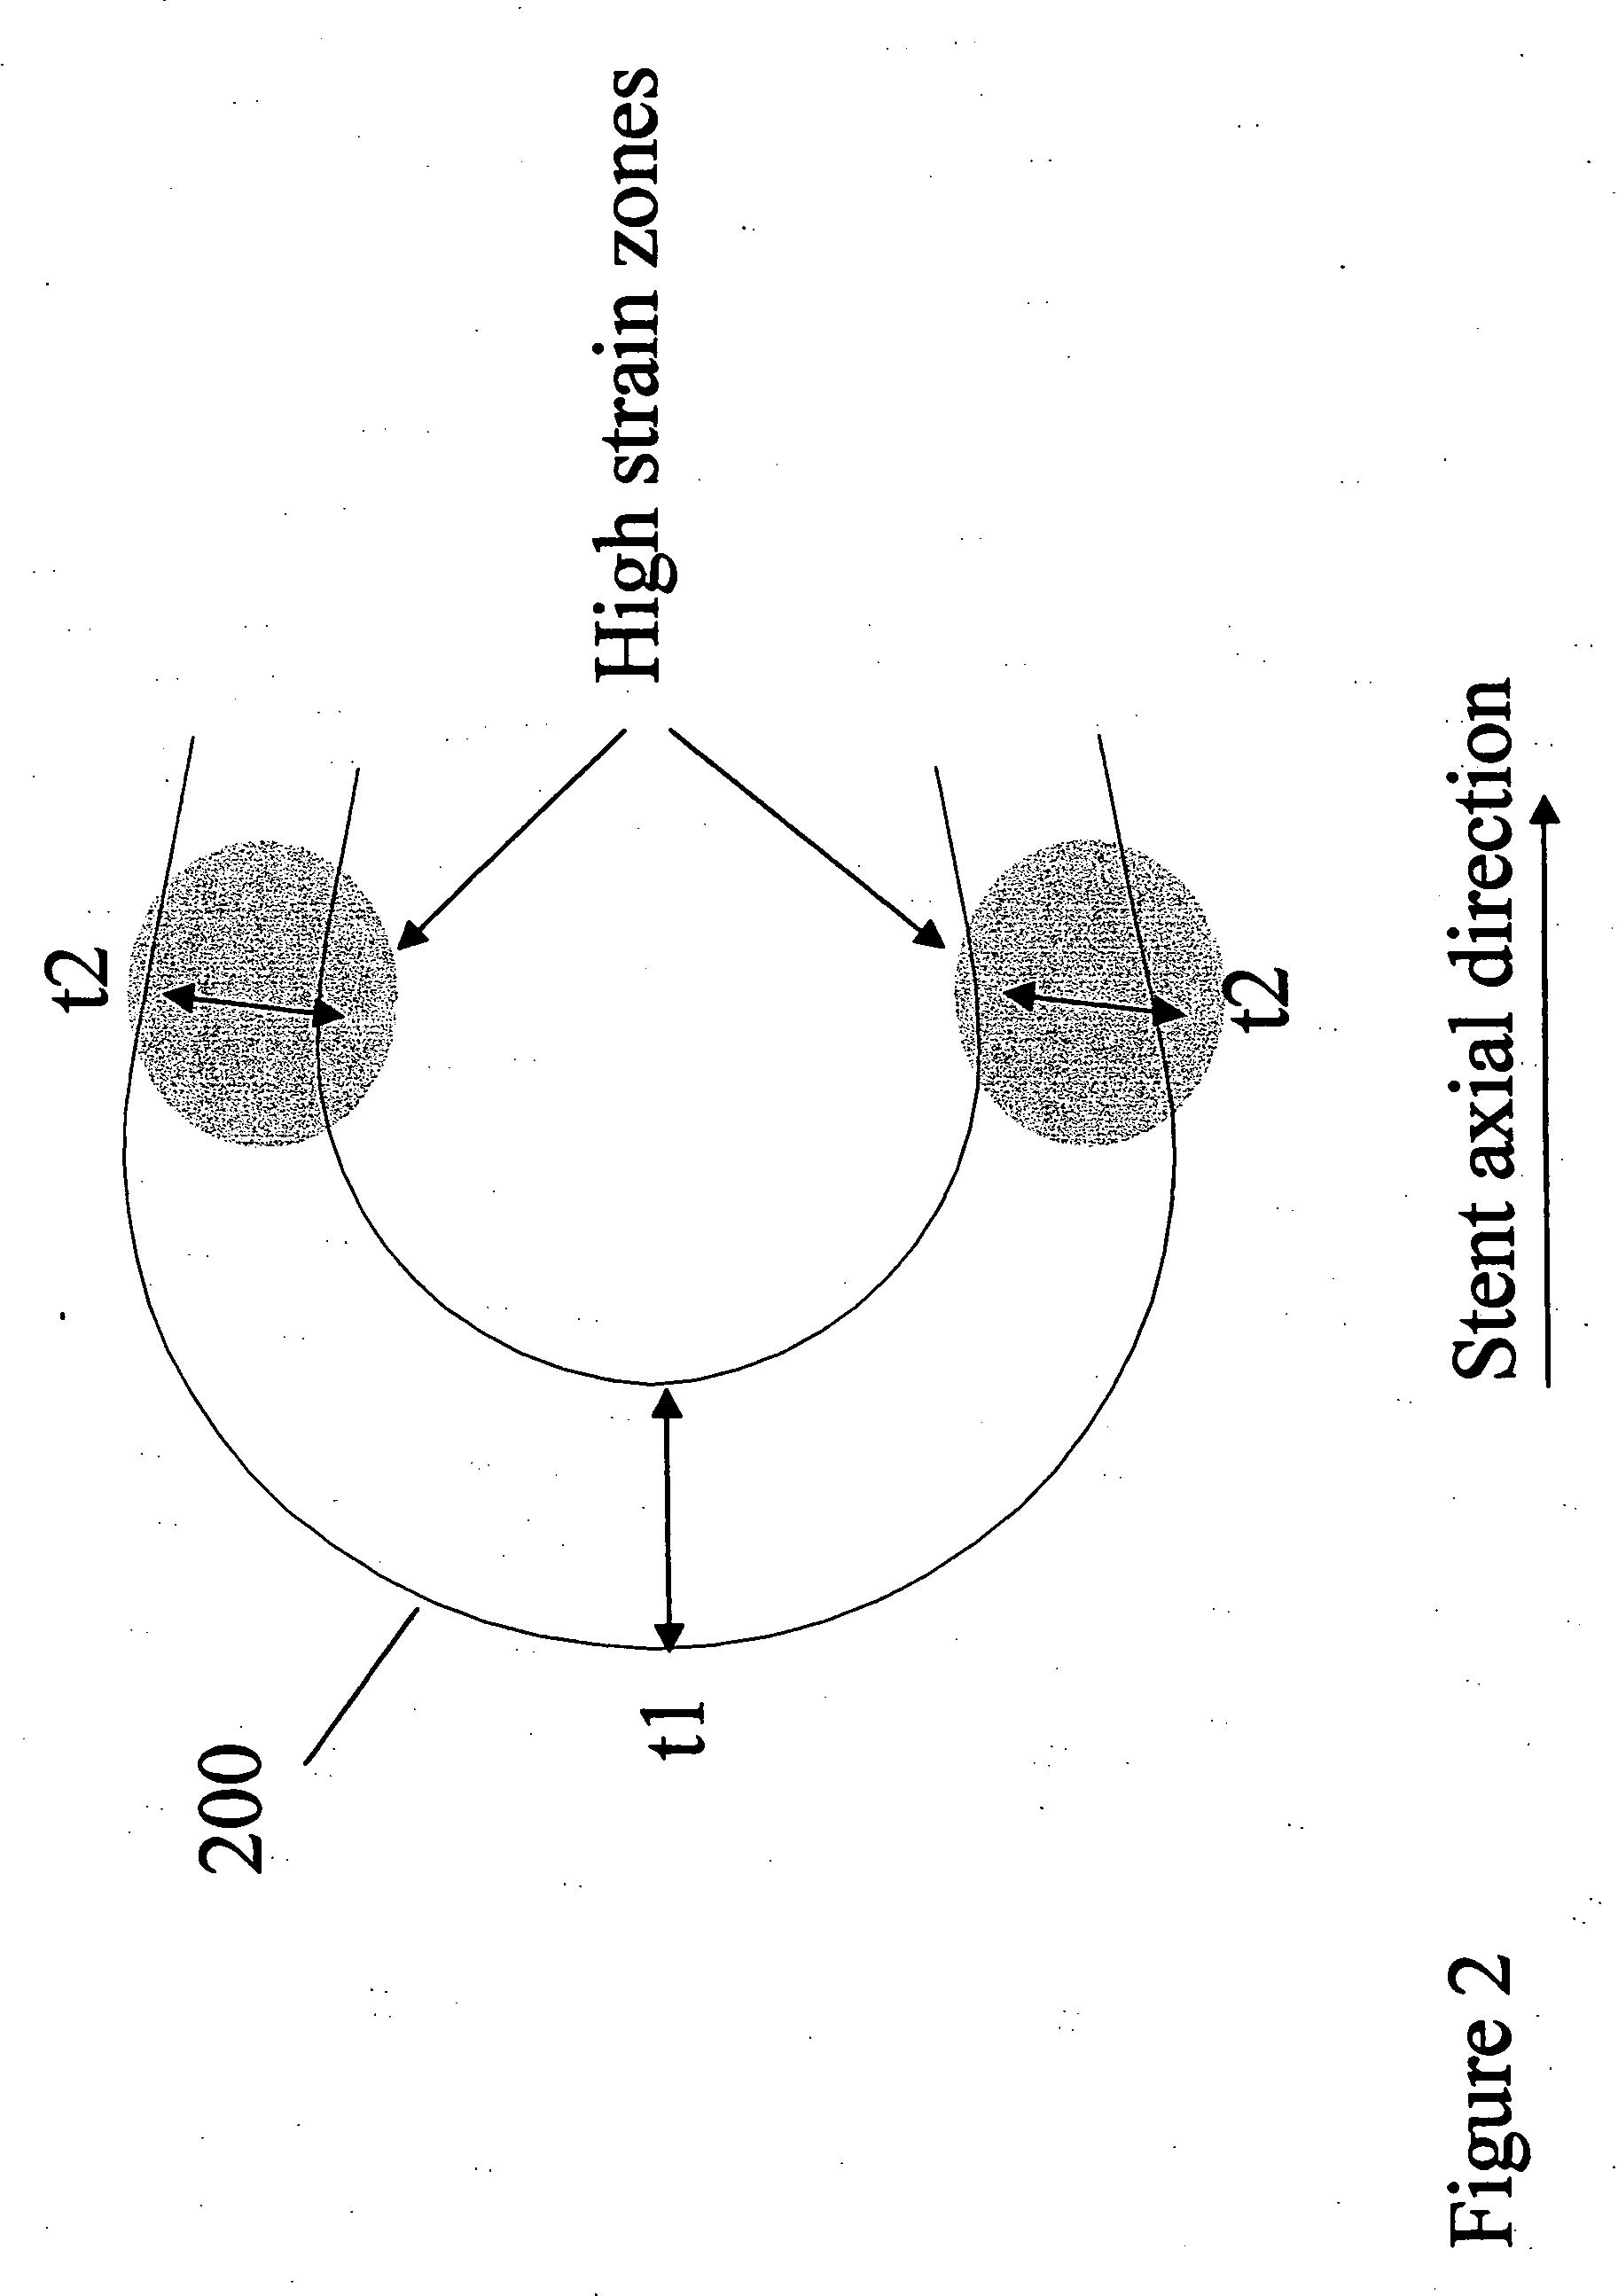 Polymeric stent having modified molecular structures